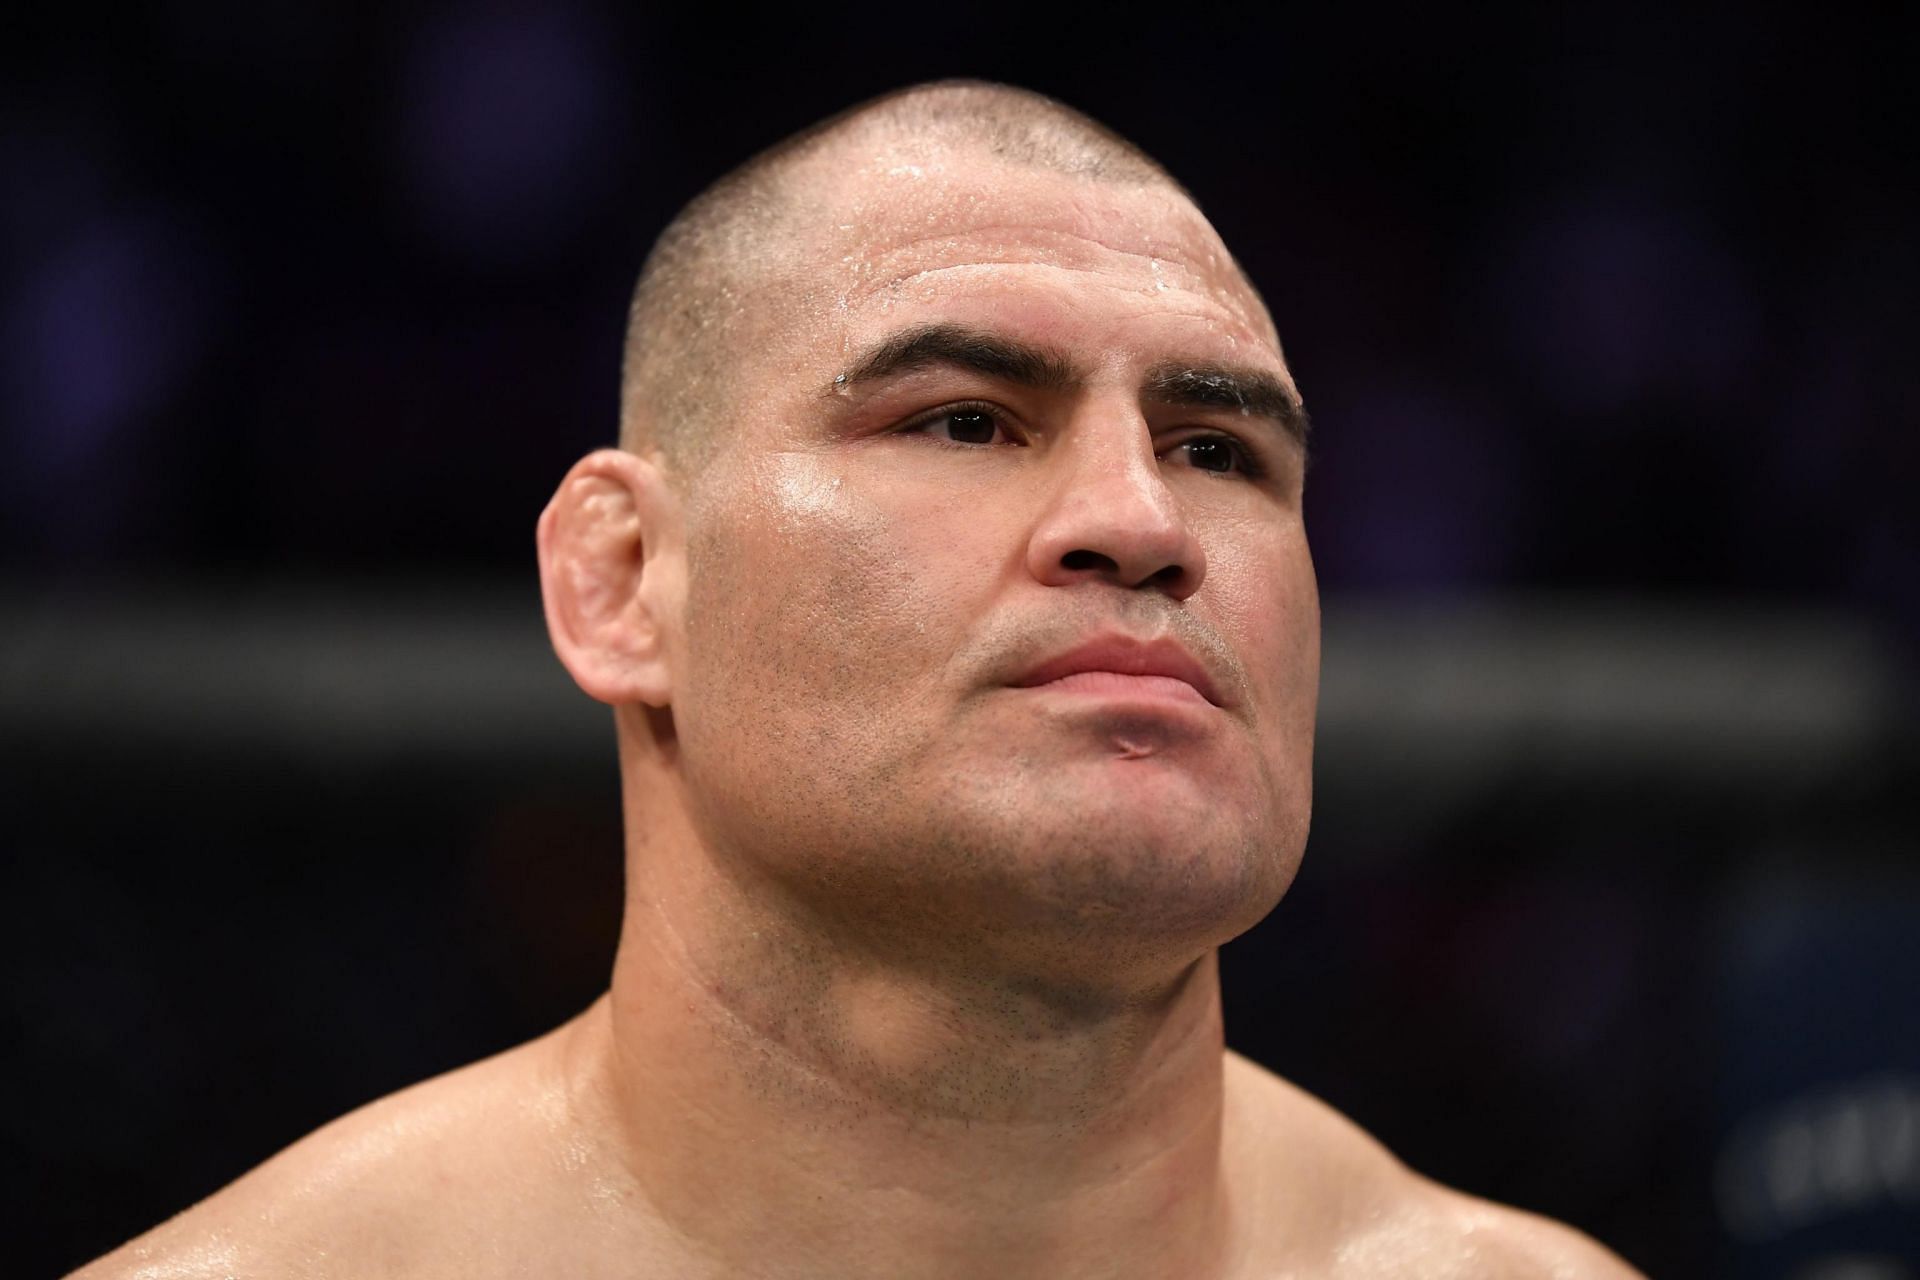 The former UFC Champion was arrested